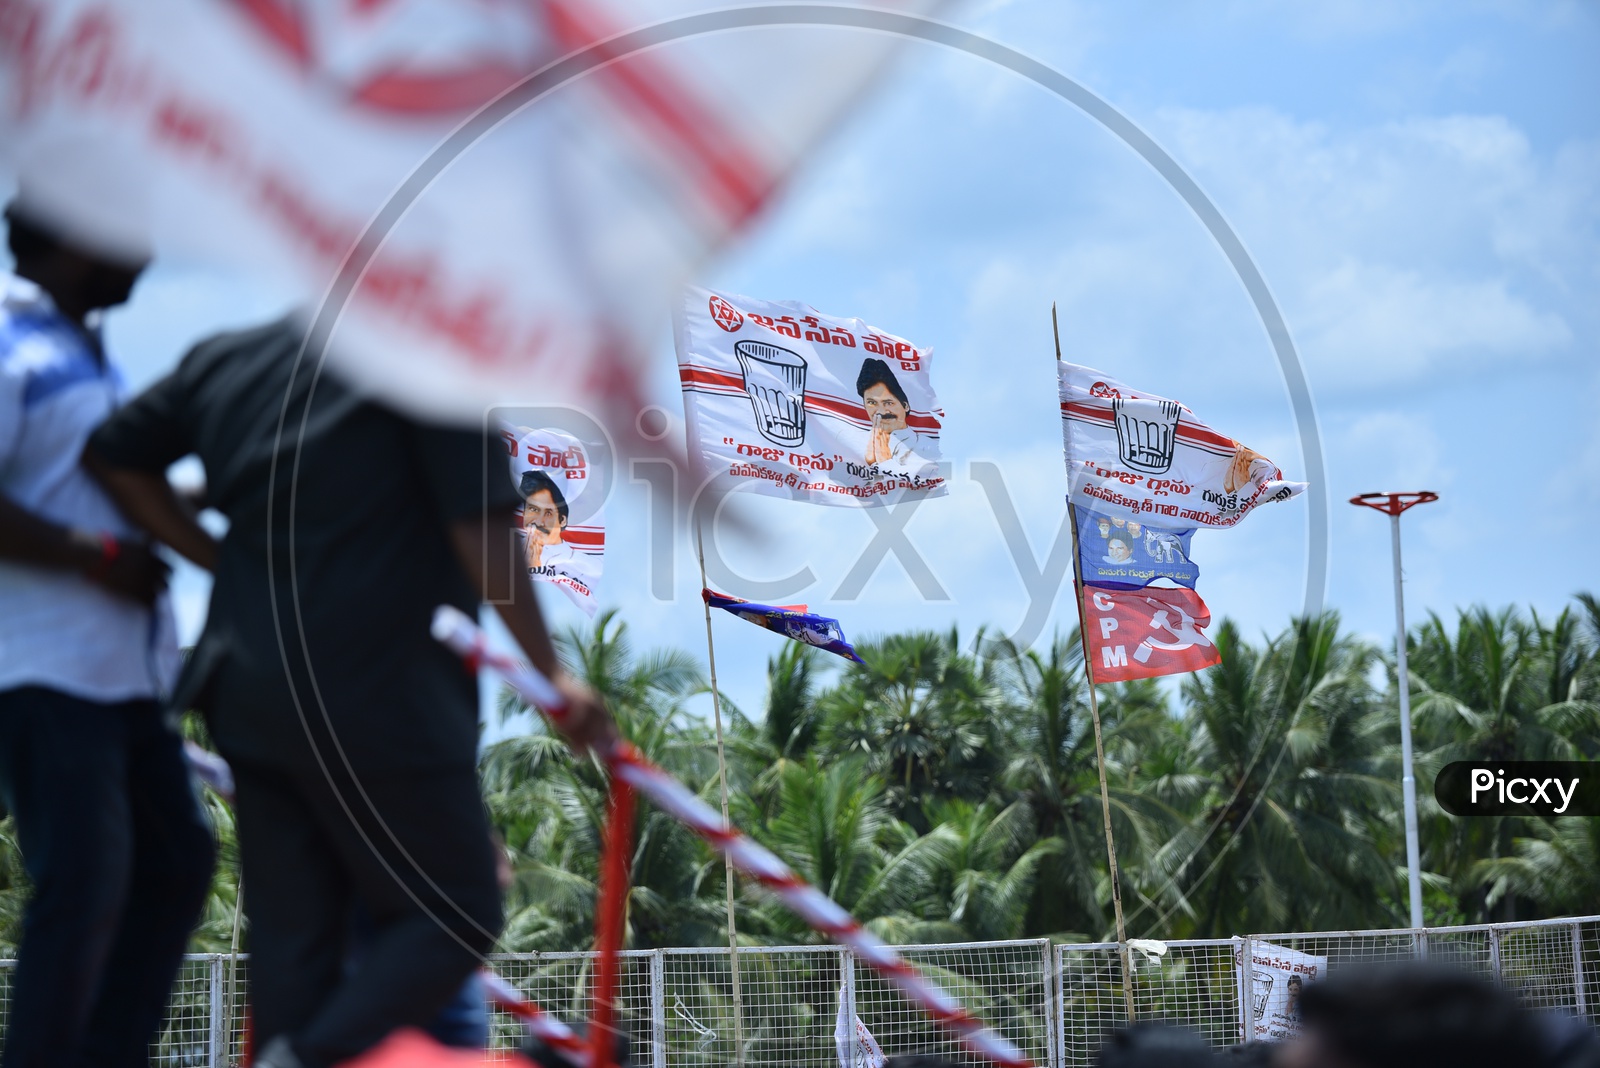 CPM, BSP party flags and Jana sena party flags at an election campaign in Amalapuram